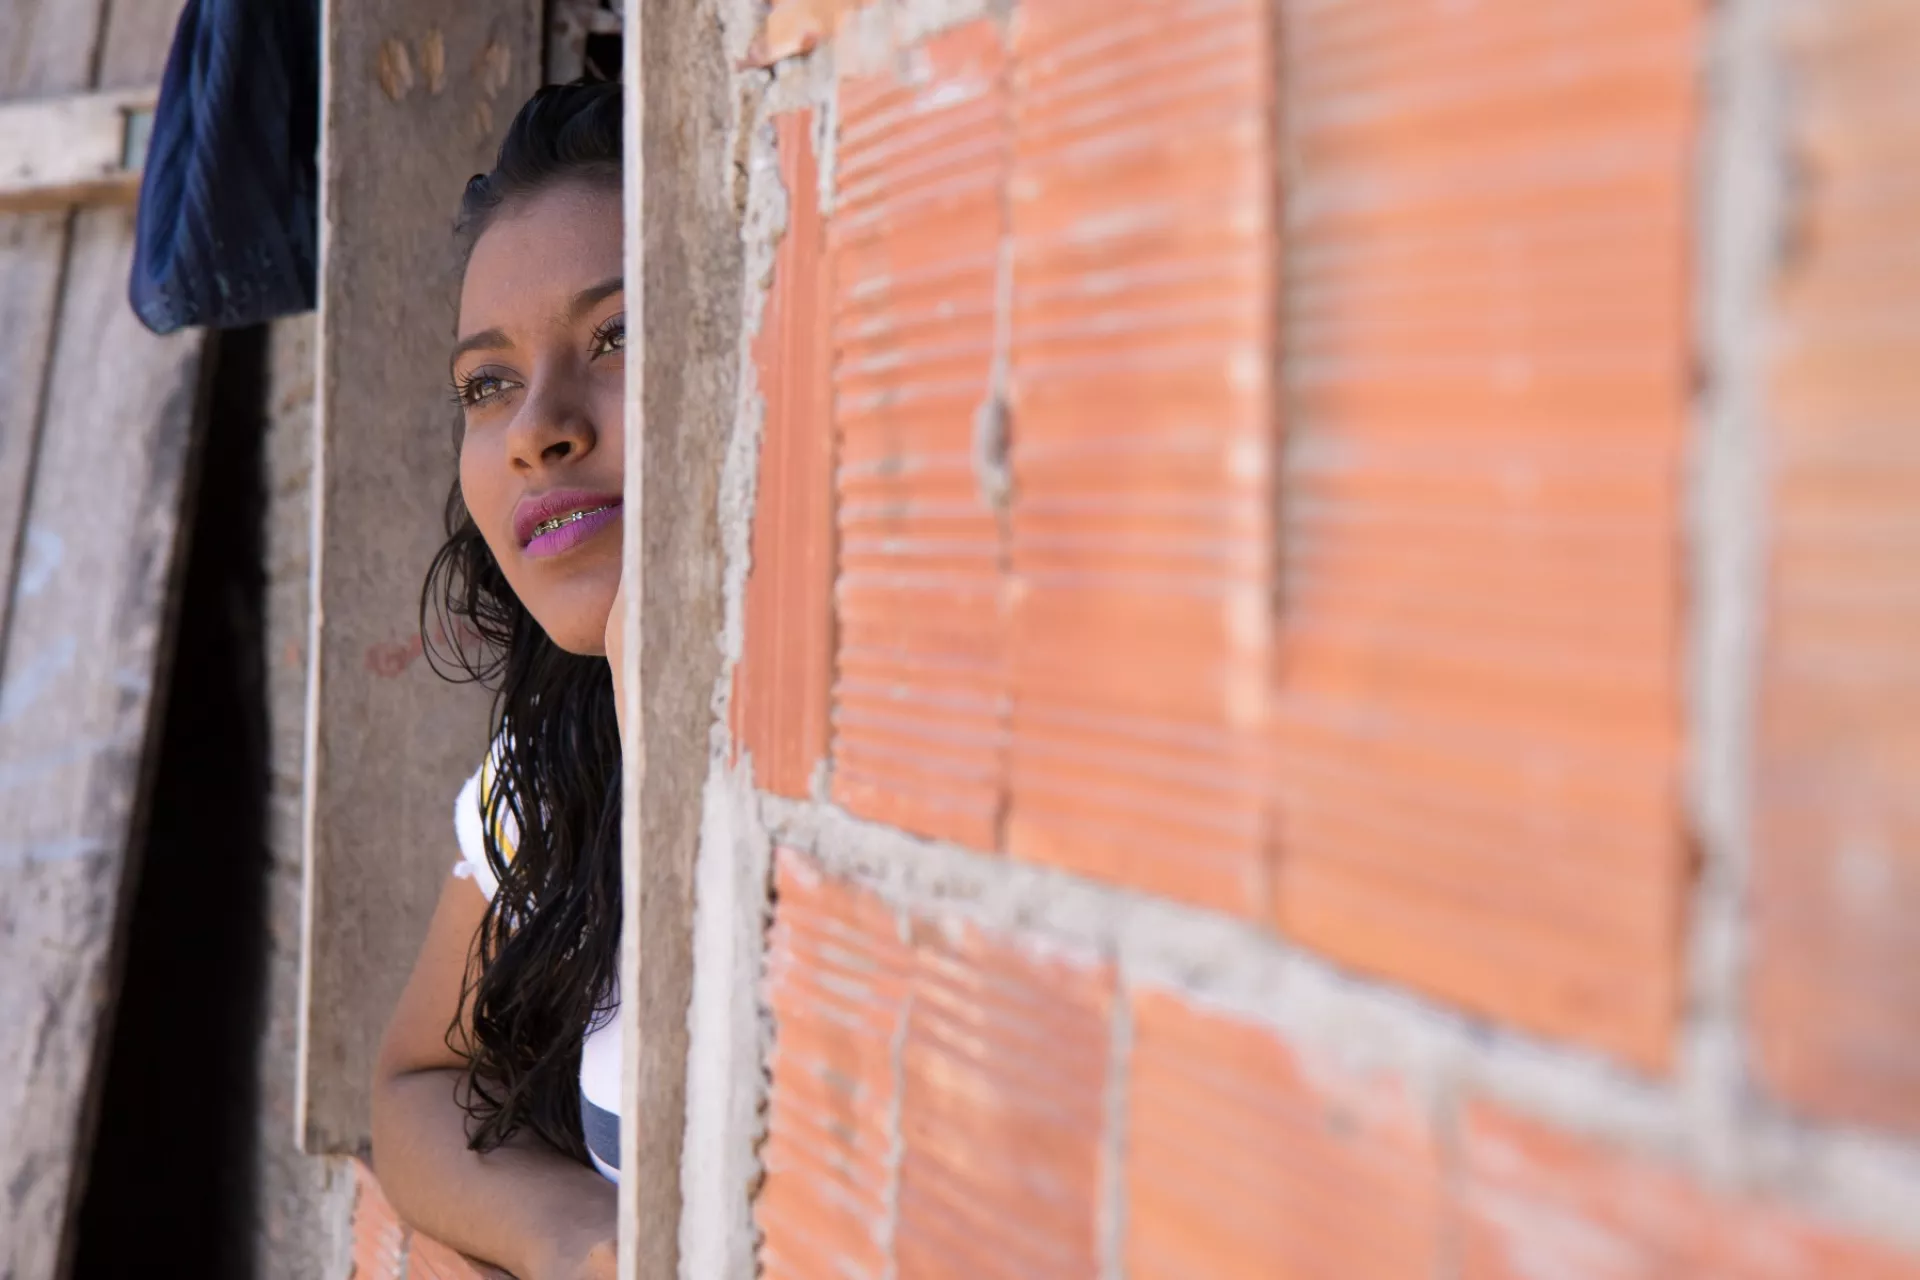 Maria Beatriz (Bia) Teixeira dos Santos looks out the window of her home.